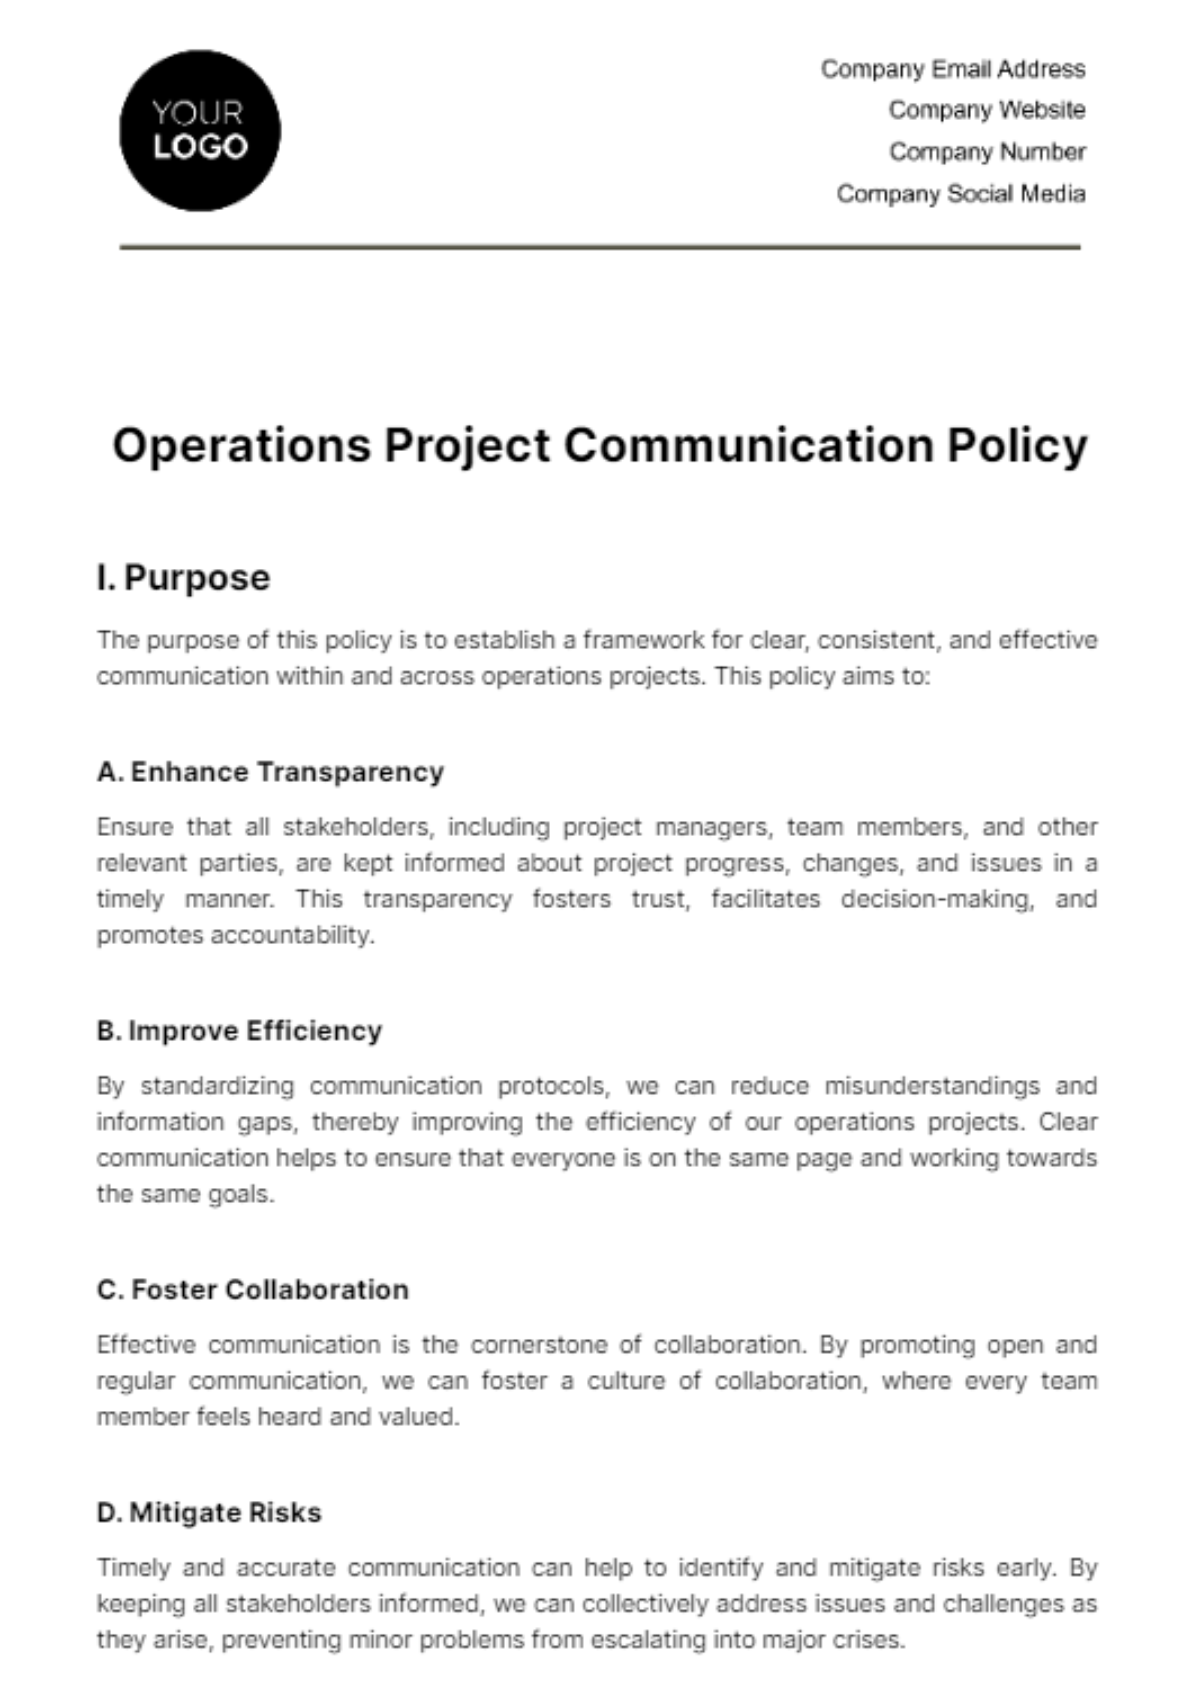 Free Operations Project Communication Policy Template